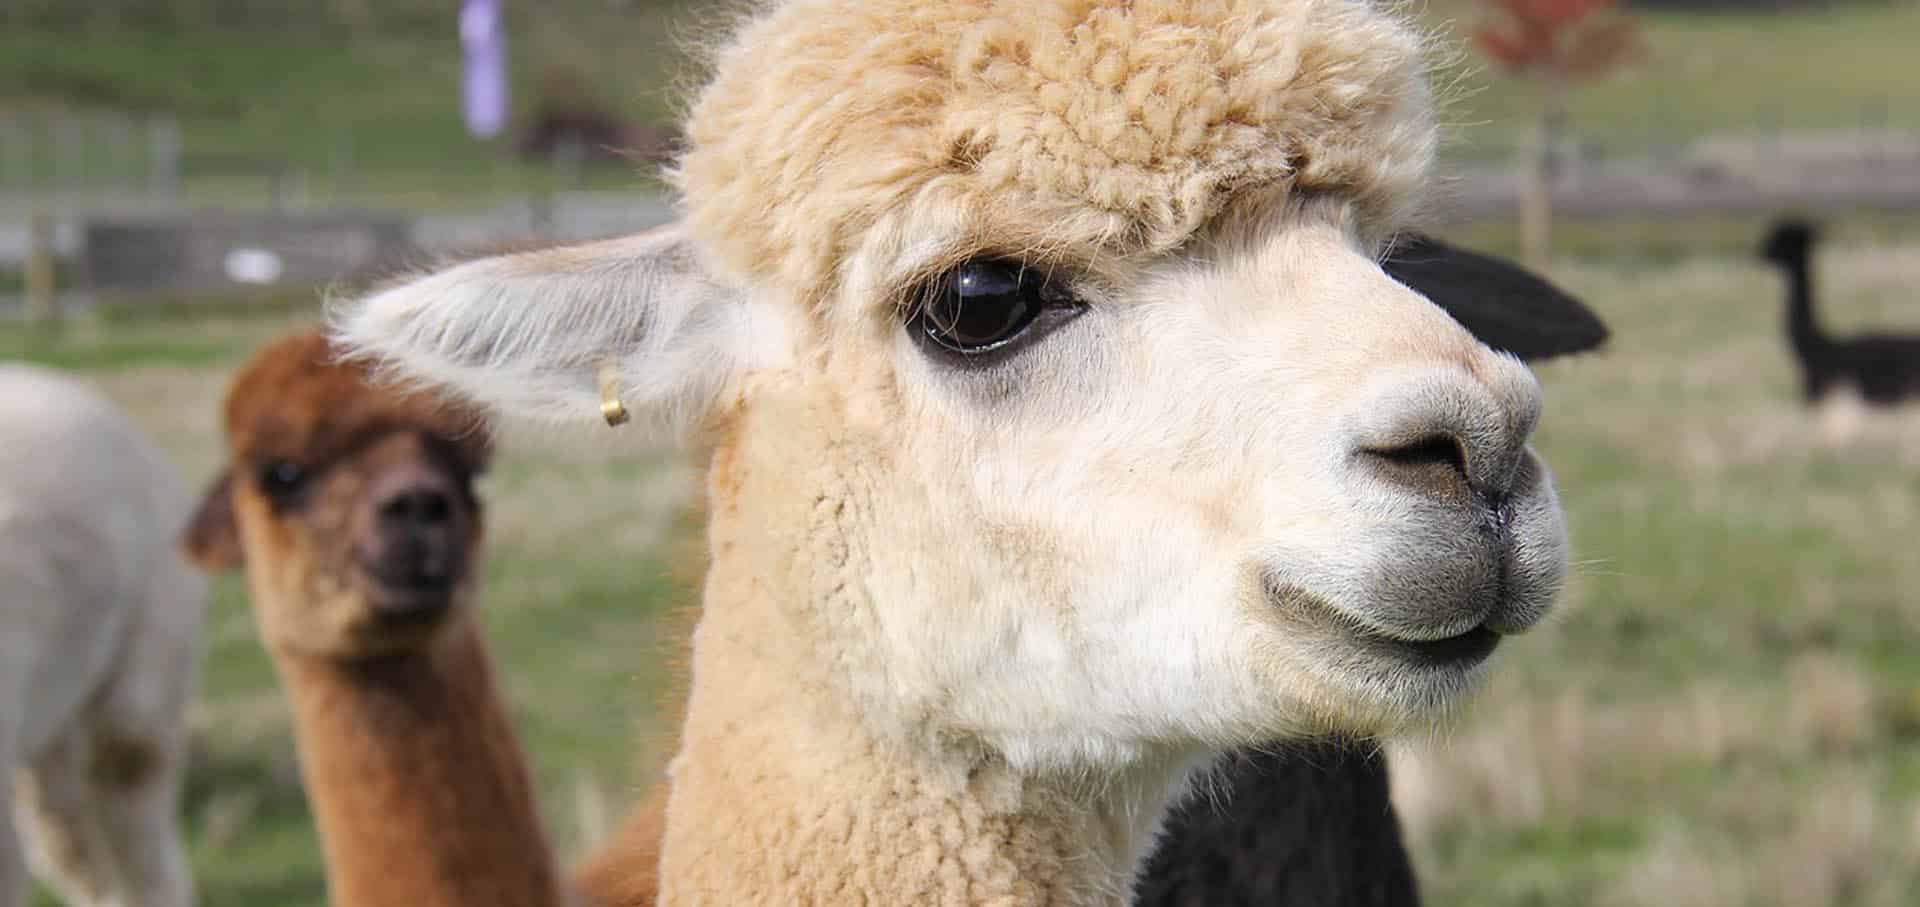 Close-up of alpaca's face — Best Veterinary Services in Bundaberg, QLD